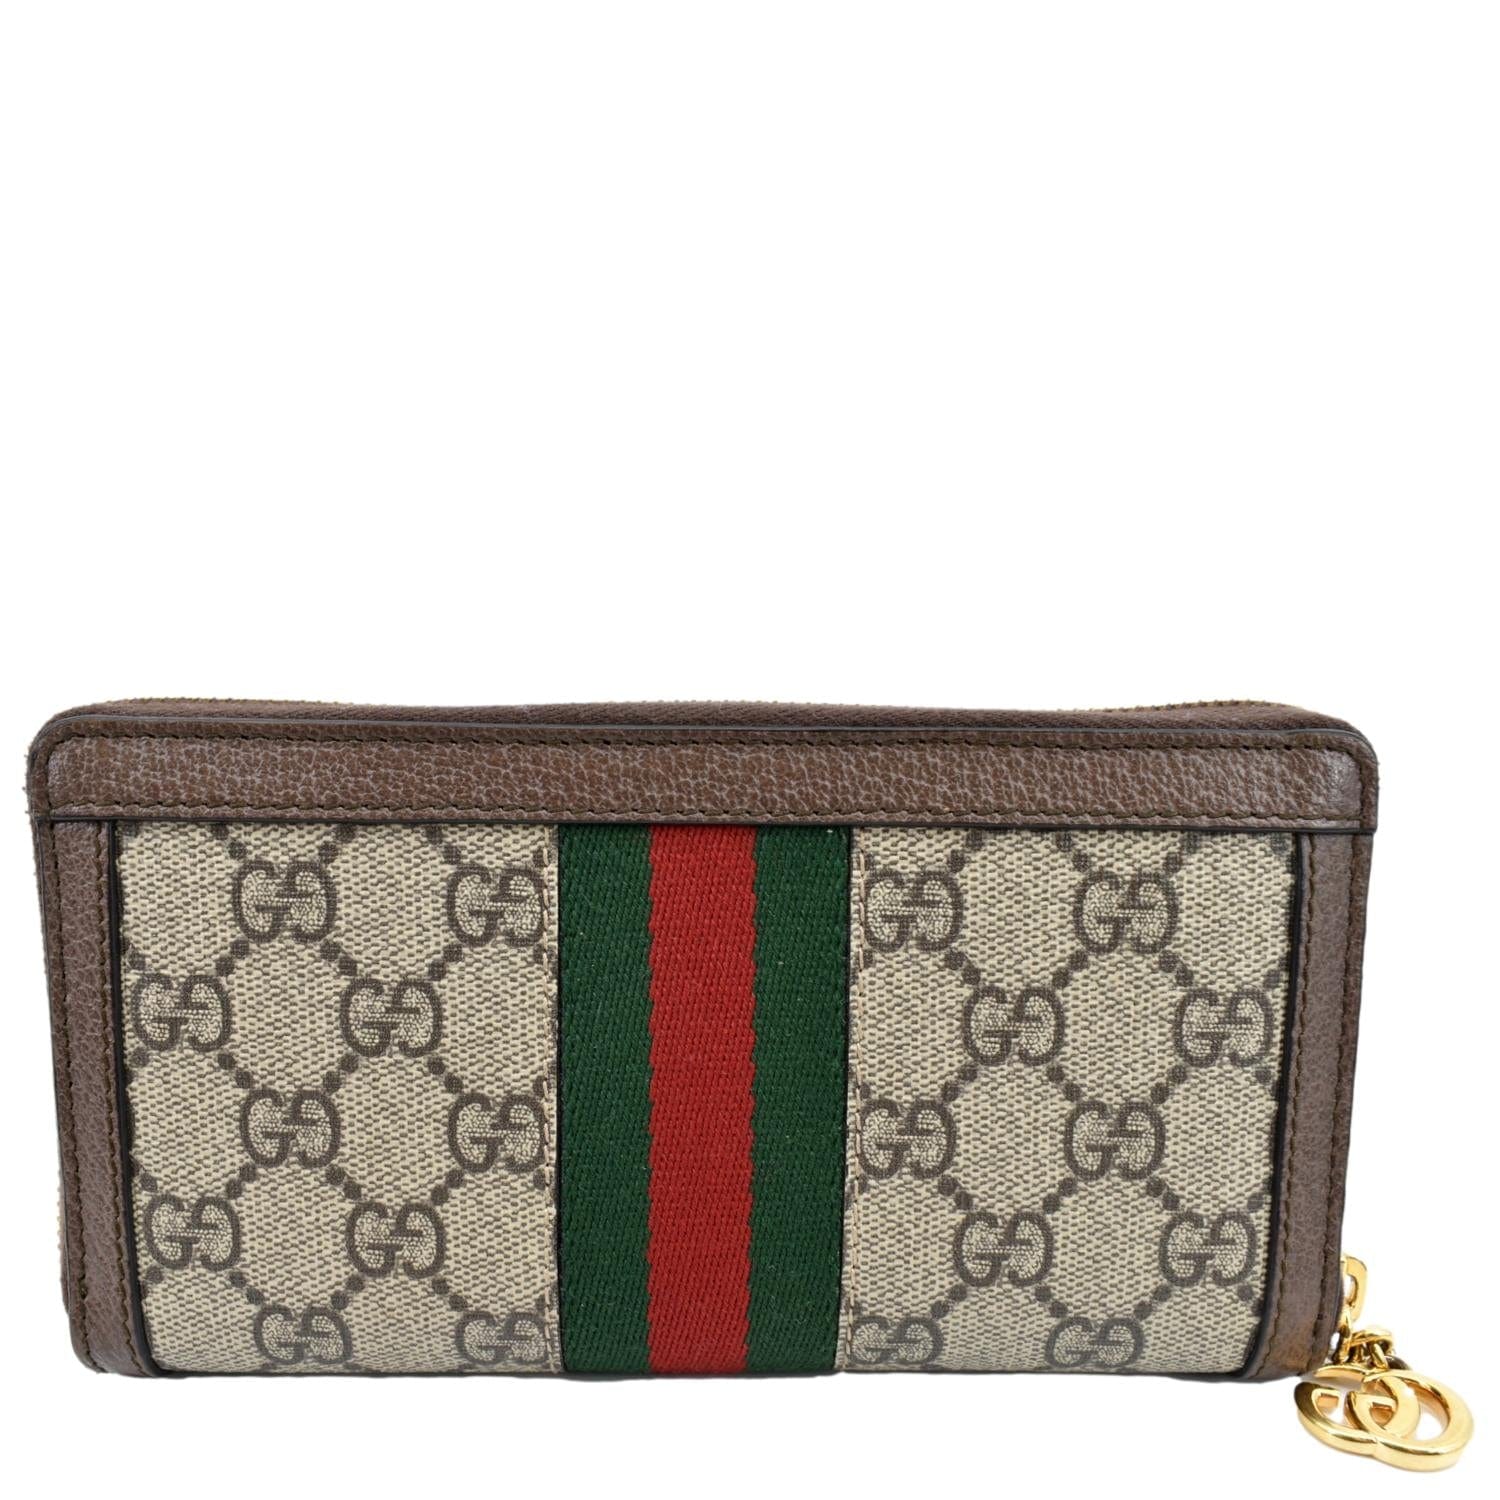 GUCCI GG Supreme Monogram Web Ophidia Continental Wallet Brown 1310541